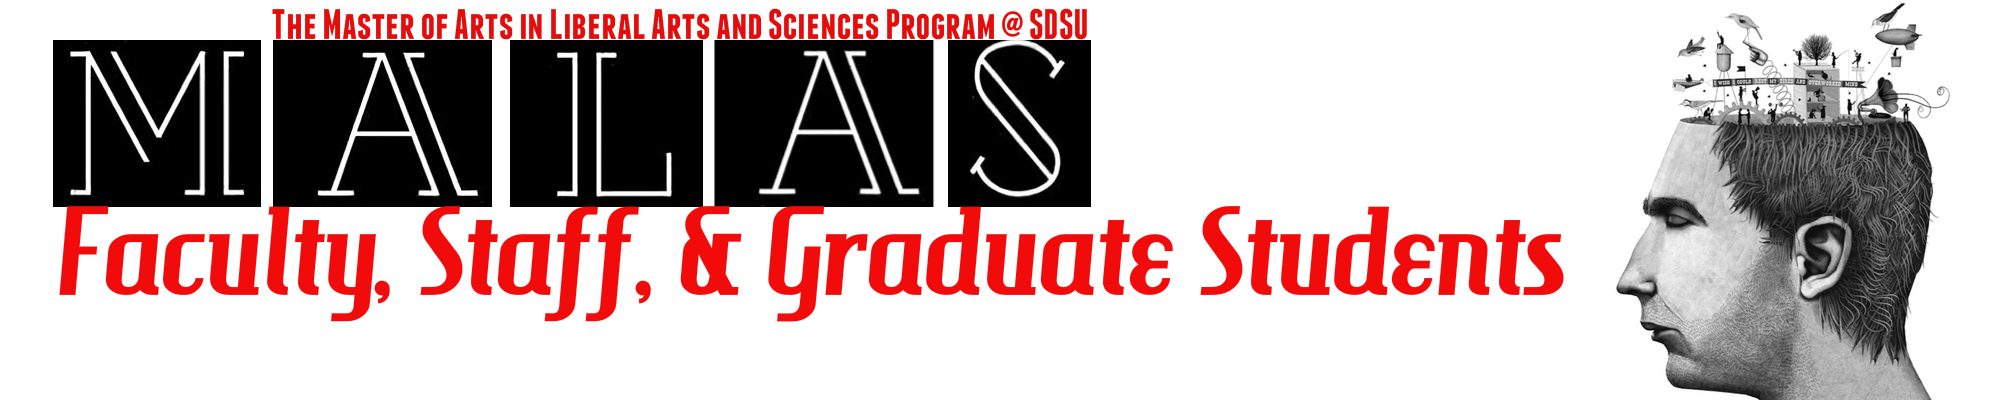 Master of Arts in Liberal Arts & Sciences (MALAS) - Faculty, Staff, and Graduate Students